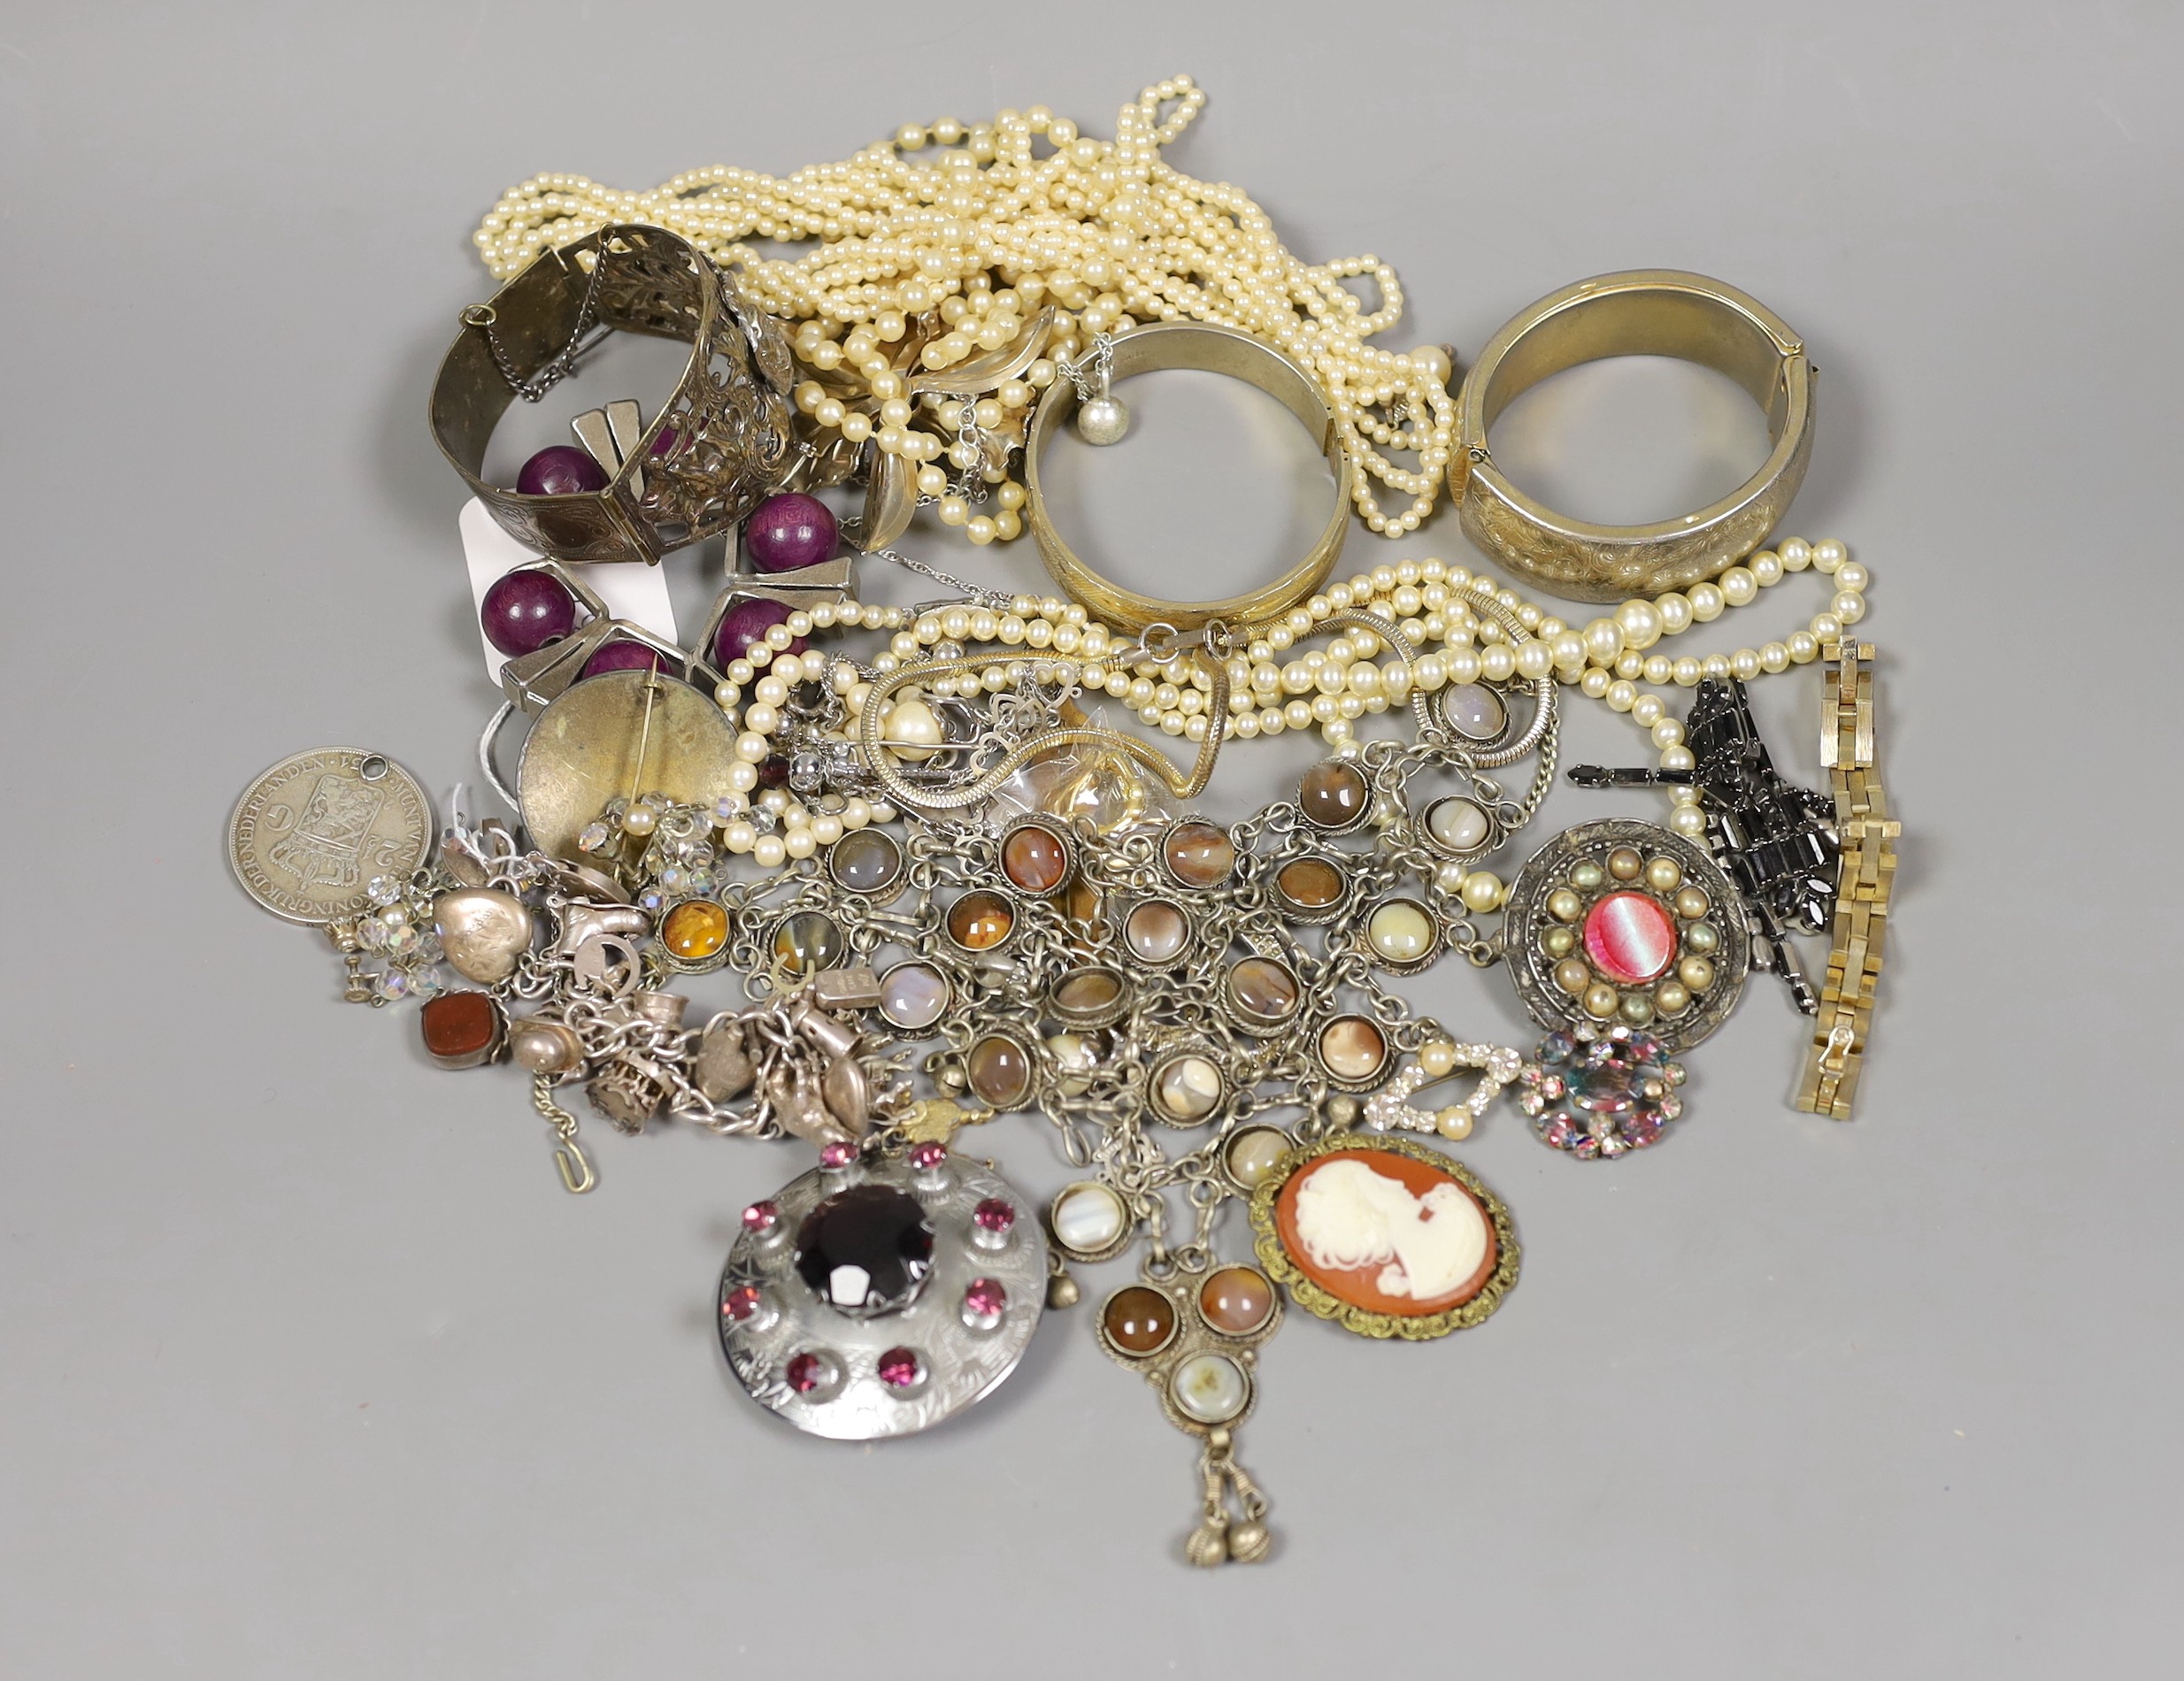 Assorted costume jewellery including a silver charm bracelet, hung with various charms including merry-go-round and bull.